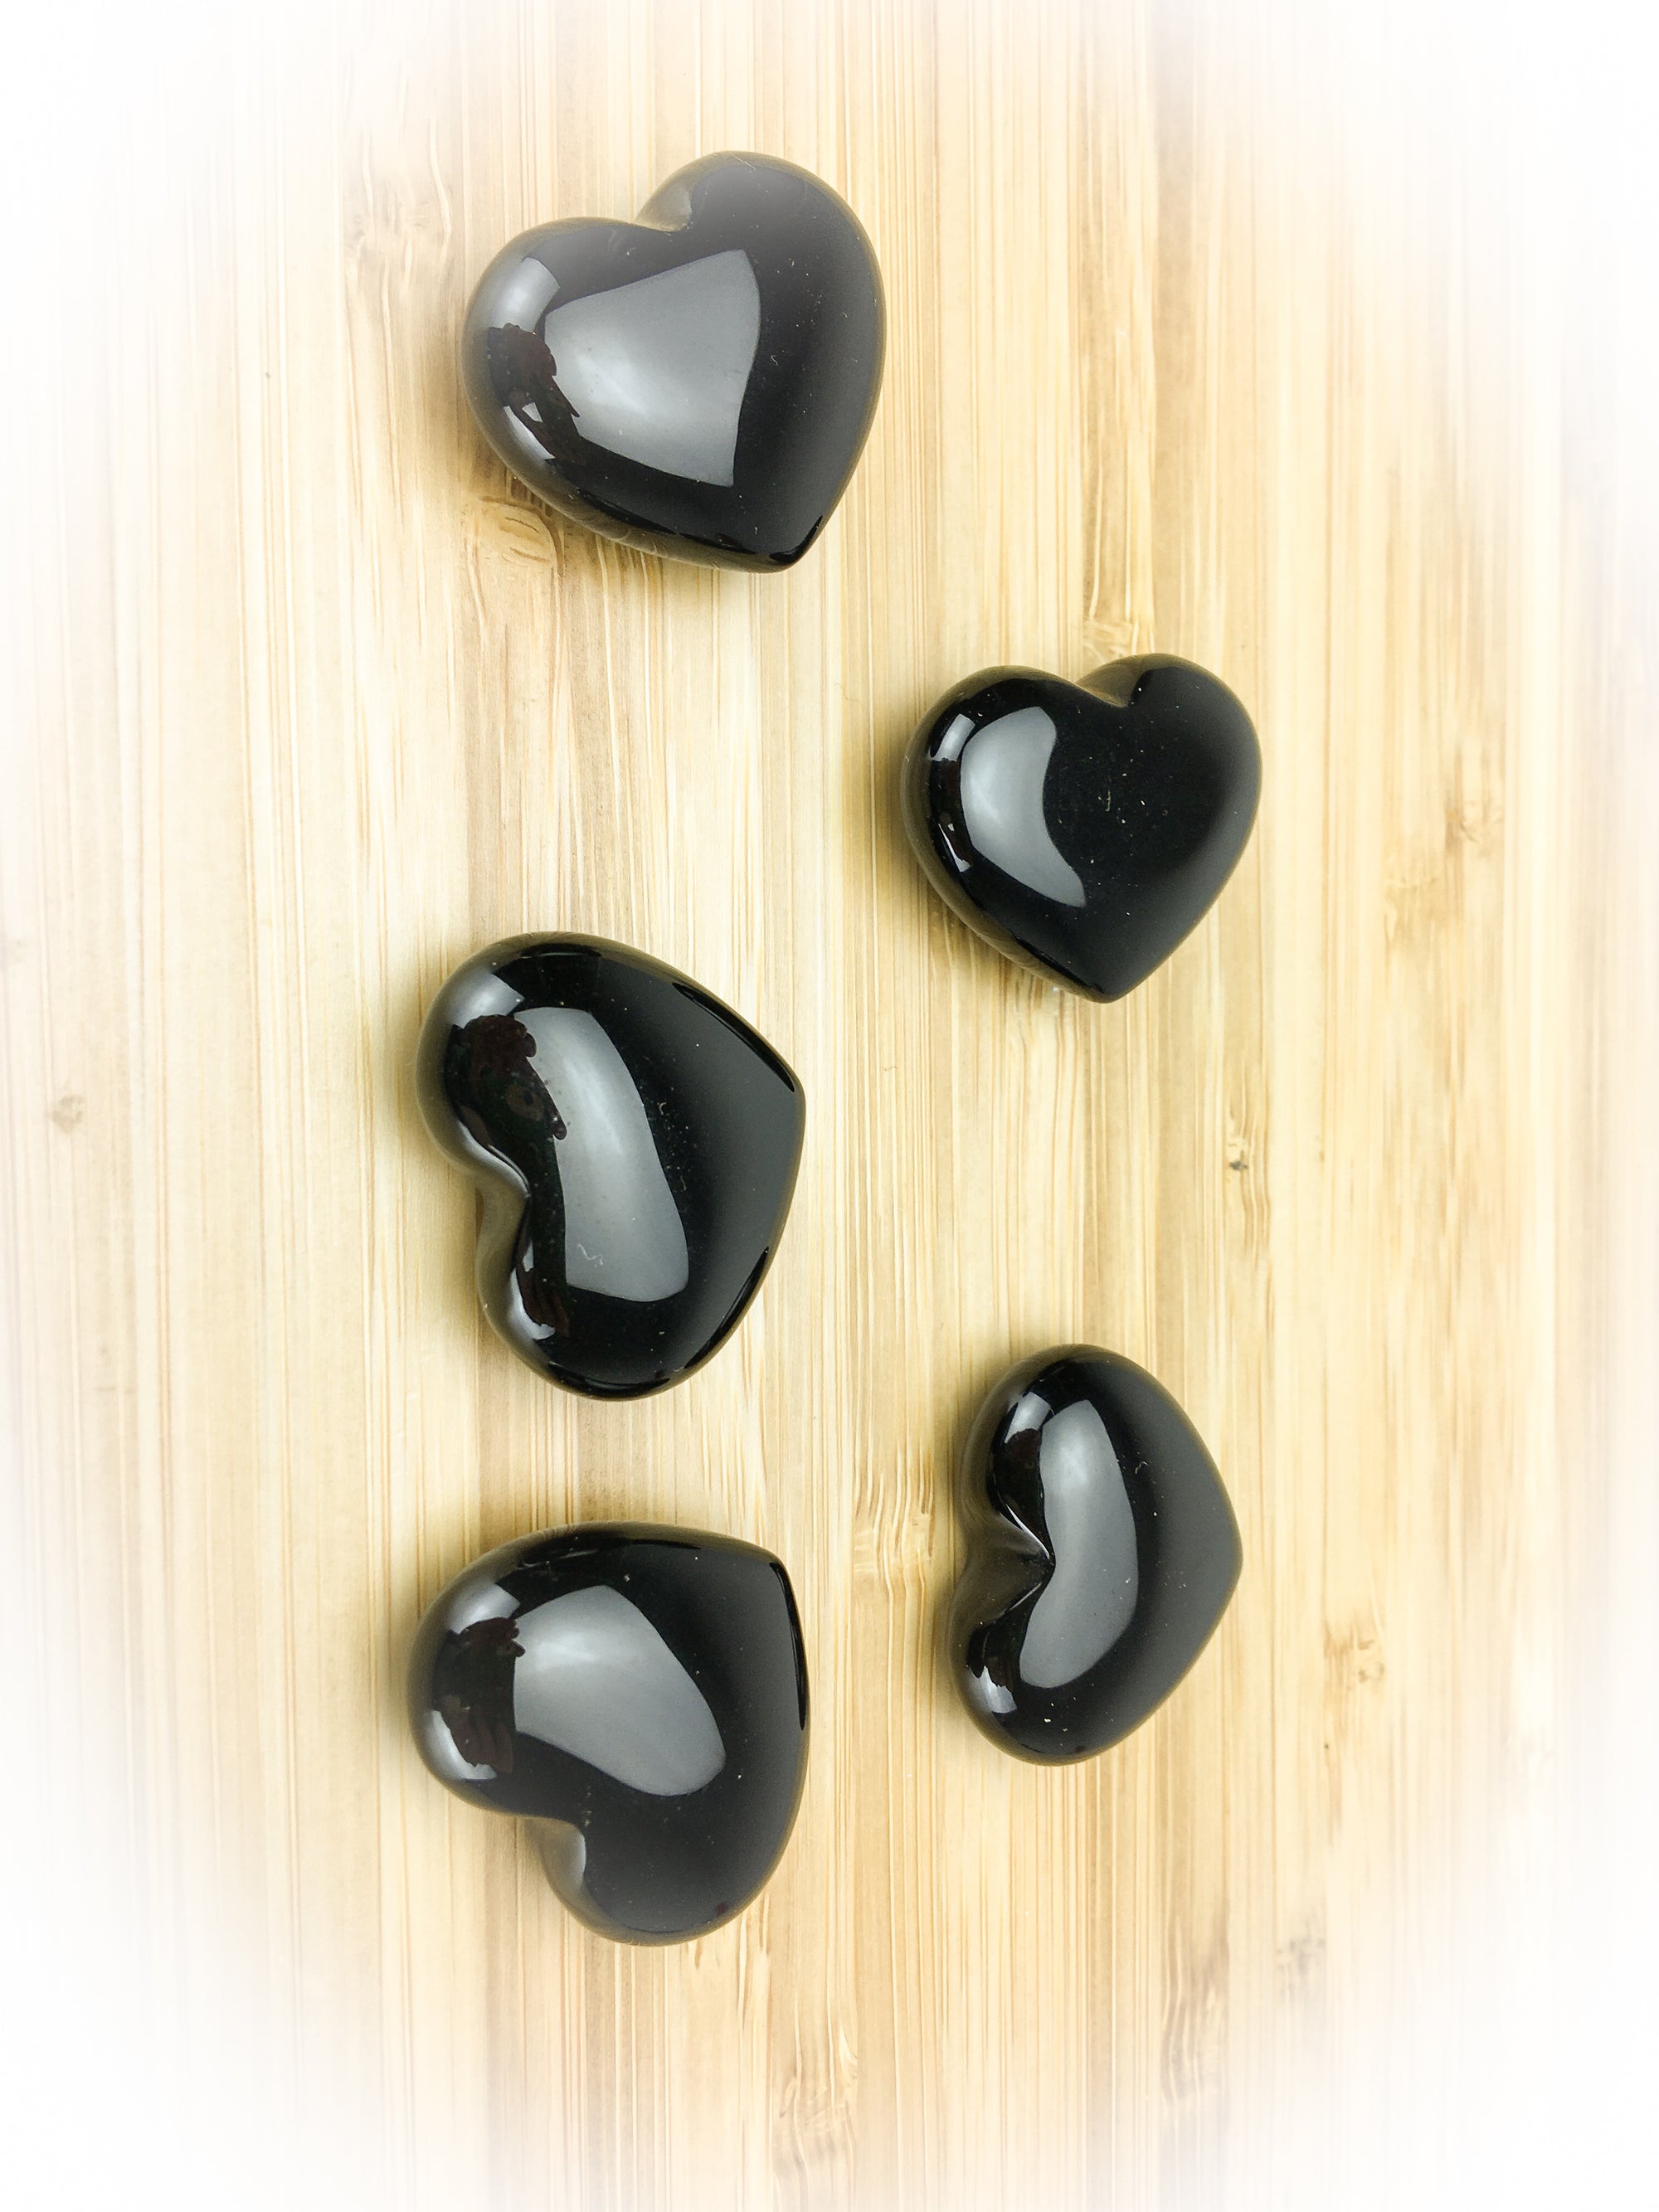 five obsidian hearts on a pale wood grain surface